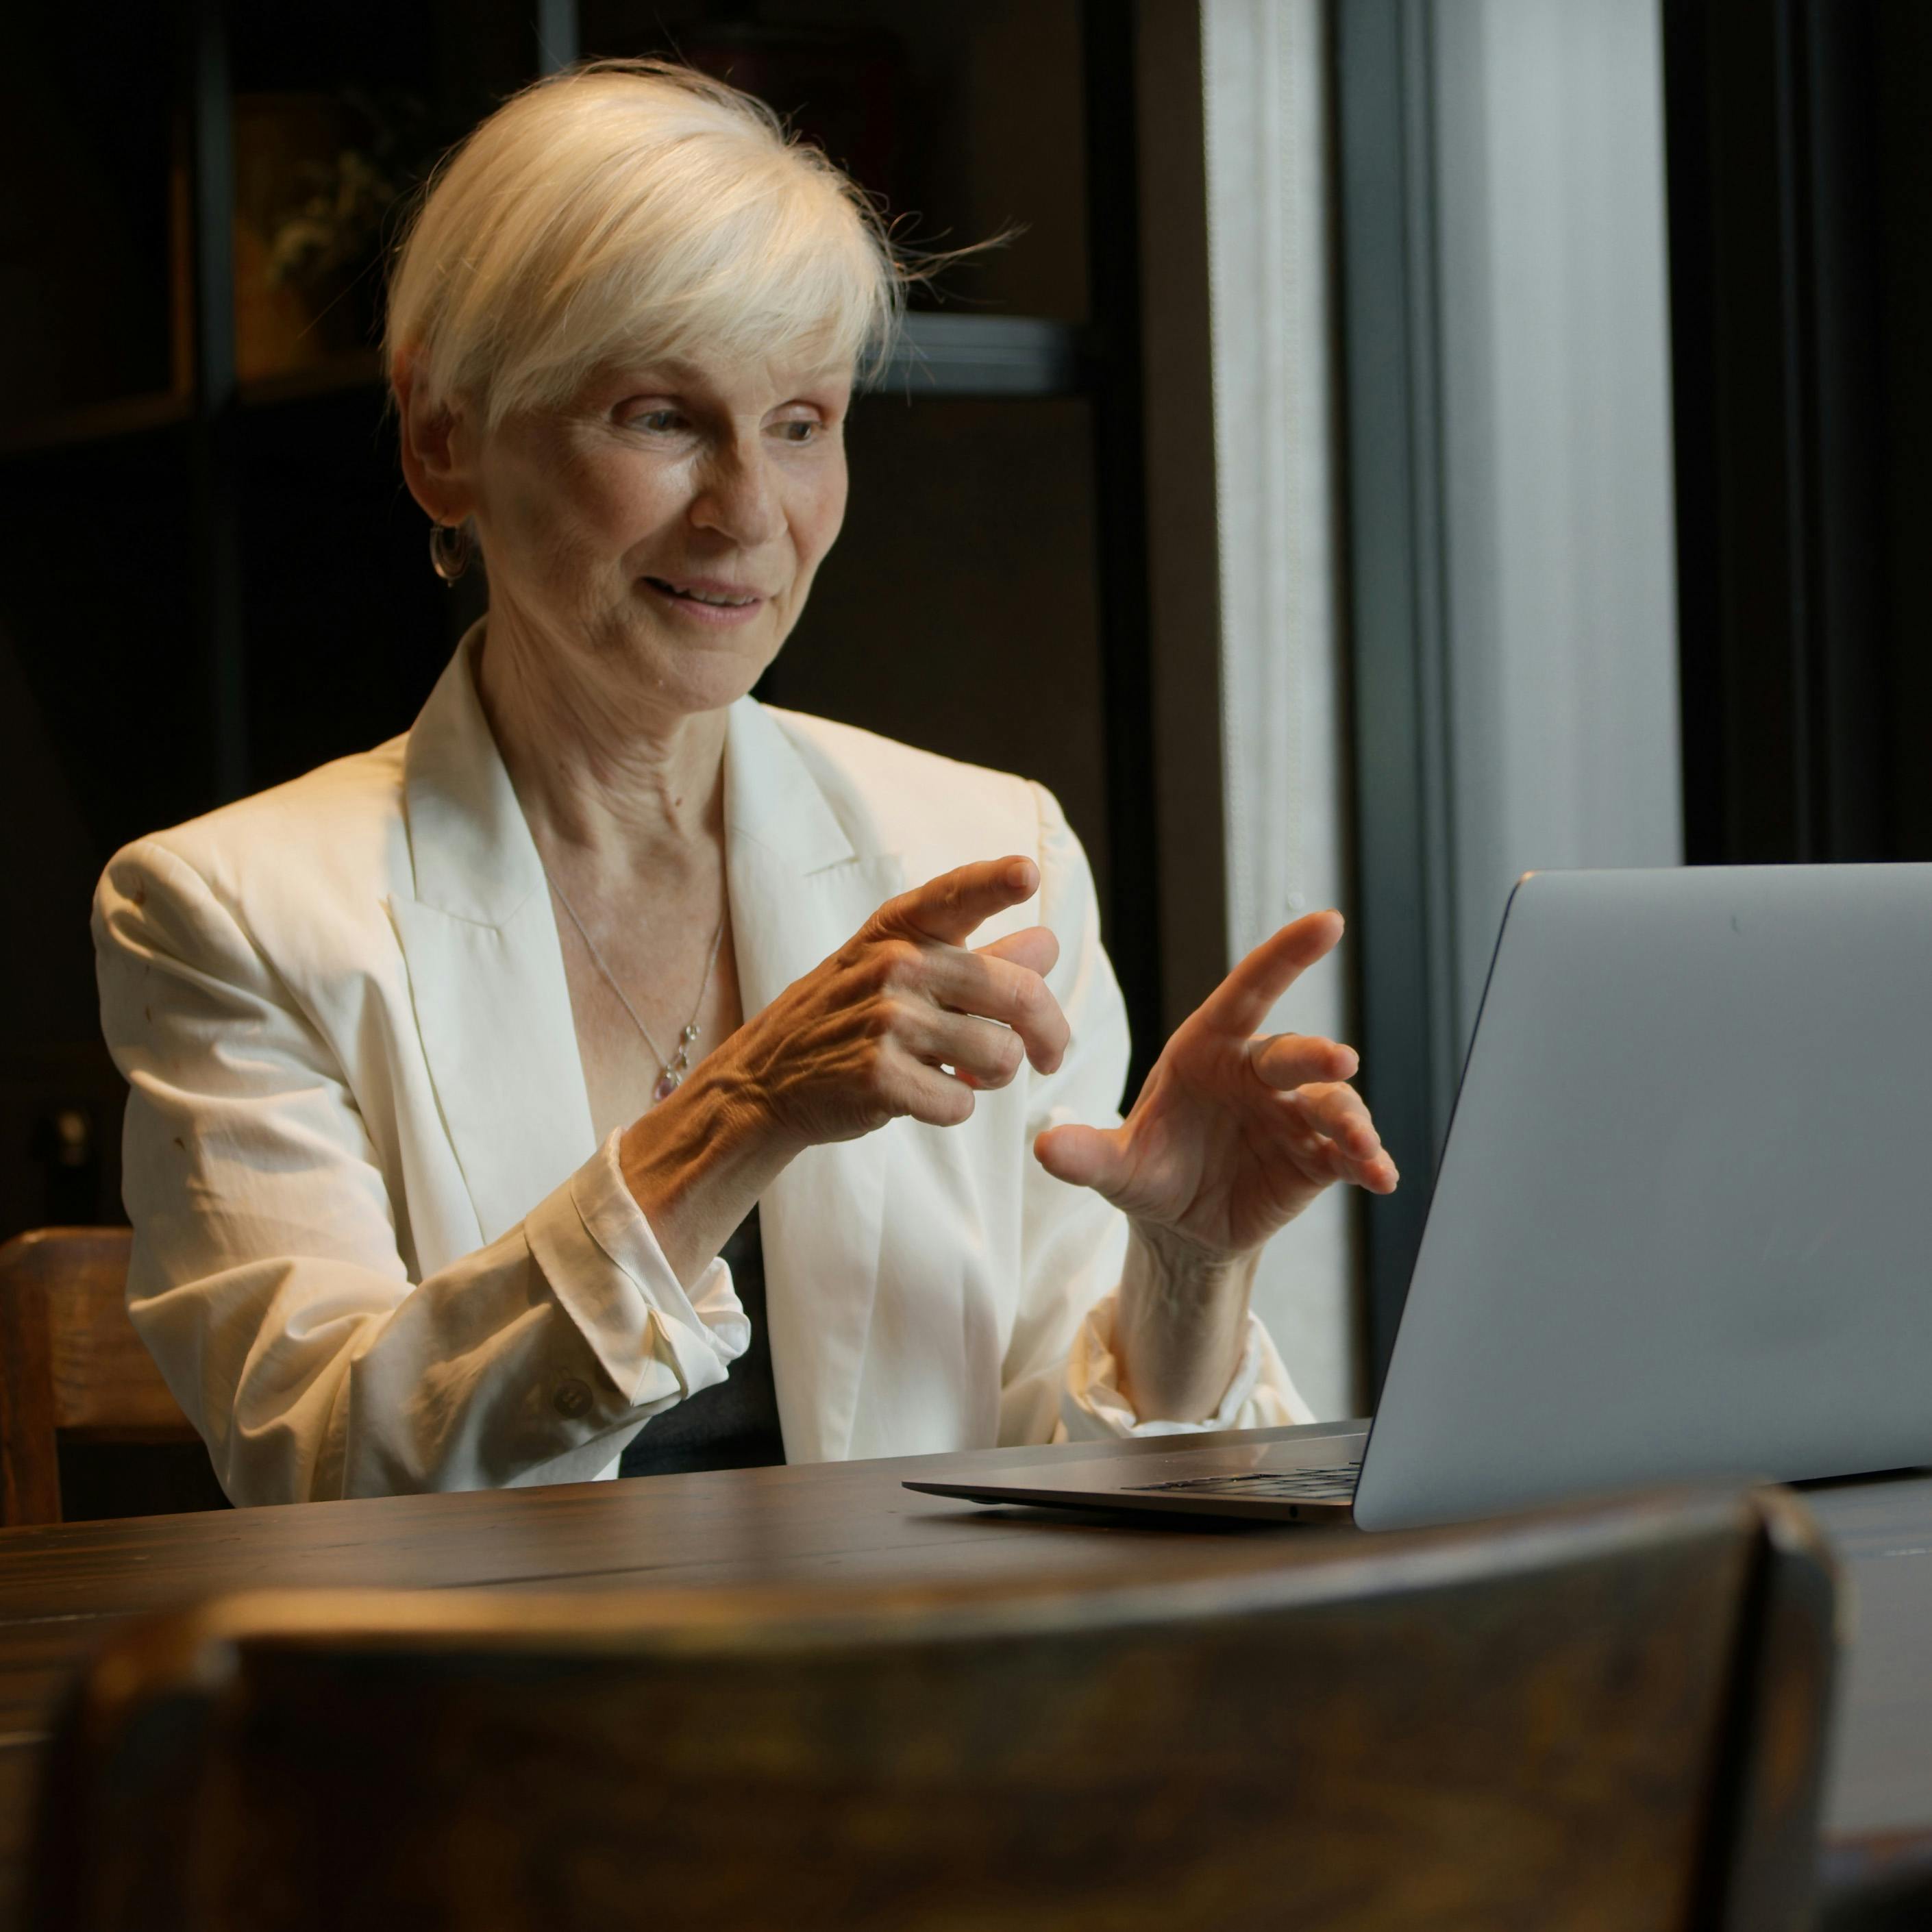 A white haired, light-skinned woman in a white business jacket speaks into her laptop, gesturing with her hands.